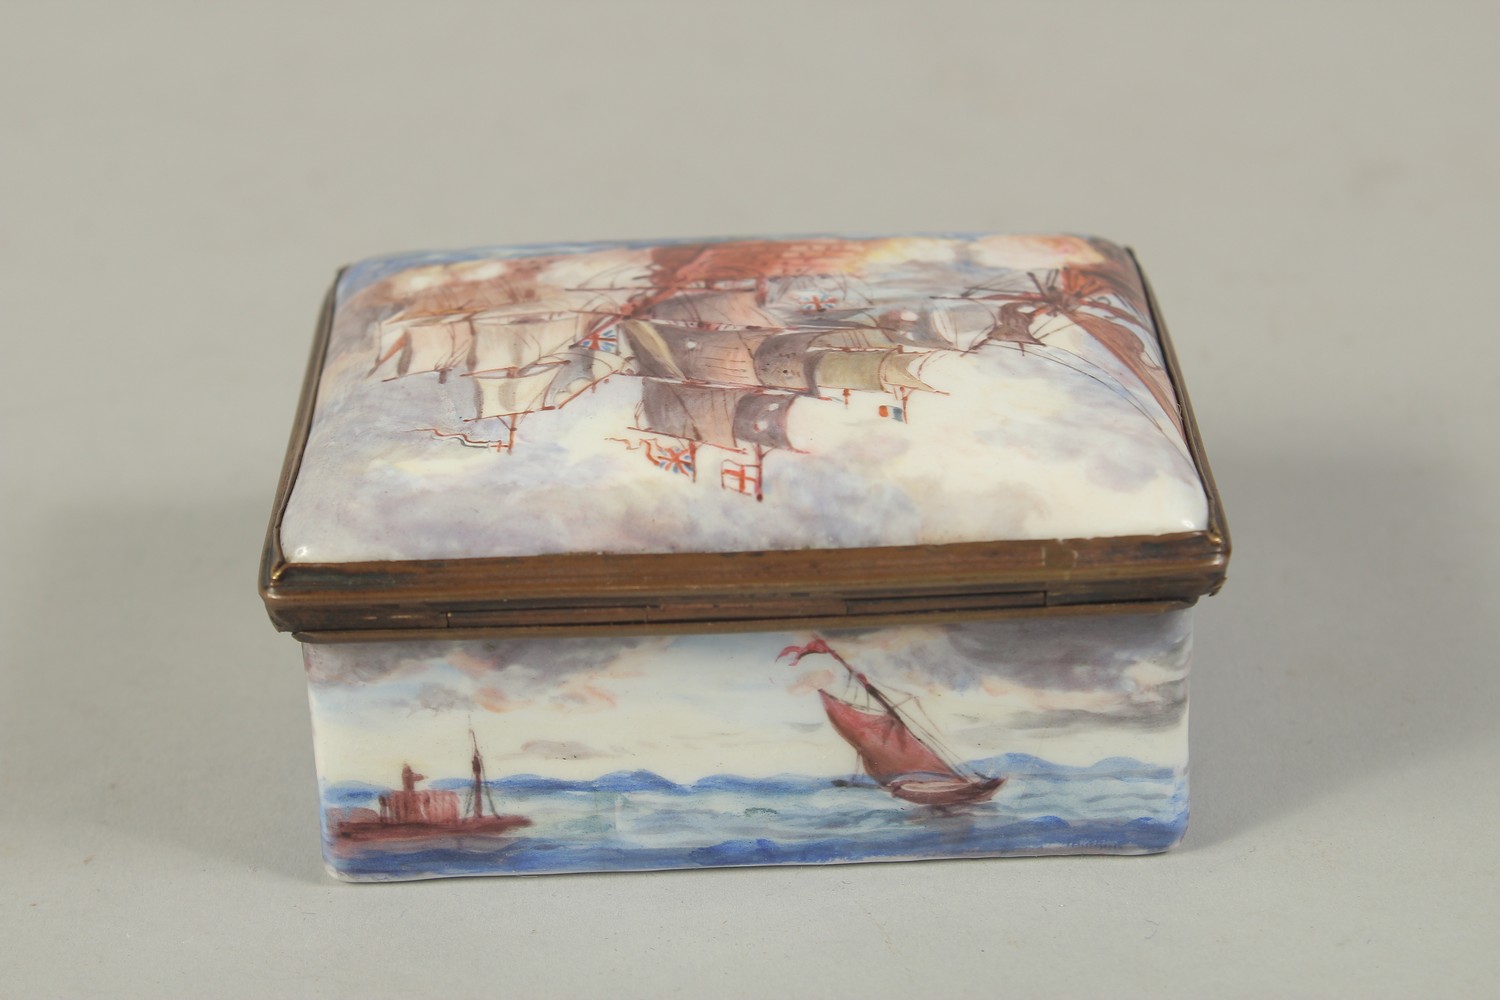 A GOOD 19TH CENTURY LORD NELSON PORCELAIN BOX the lid with a battle scene, the sides with a seascape - Image 2 of 7